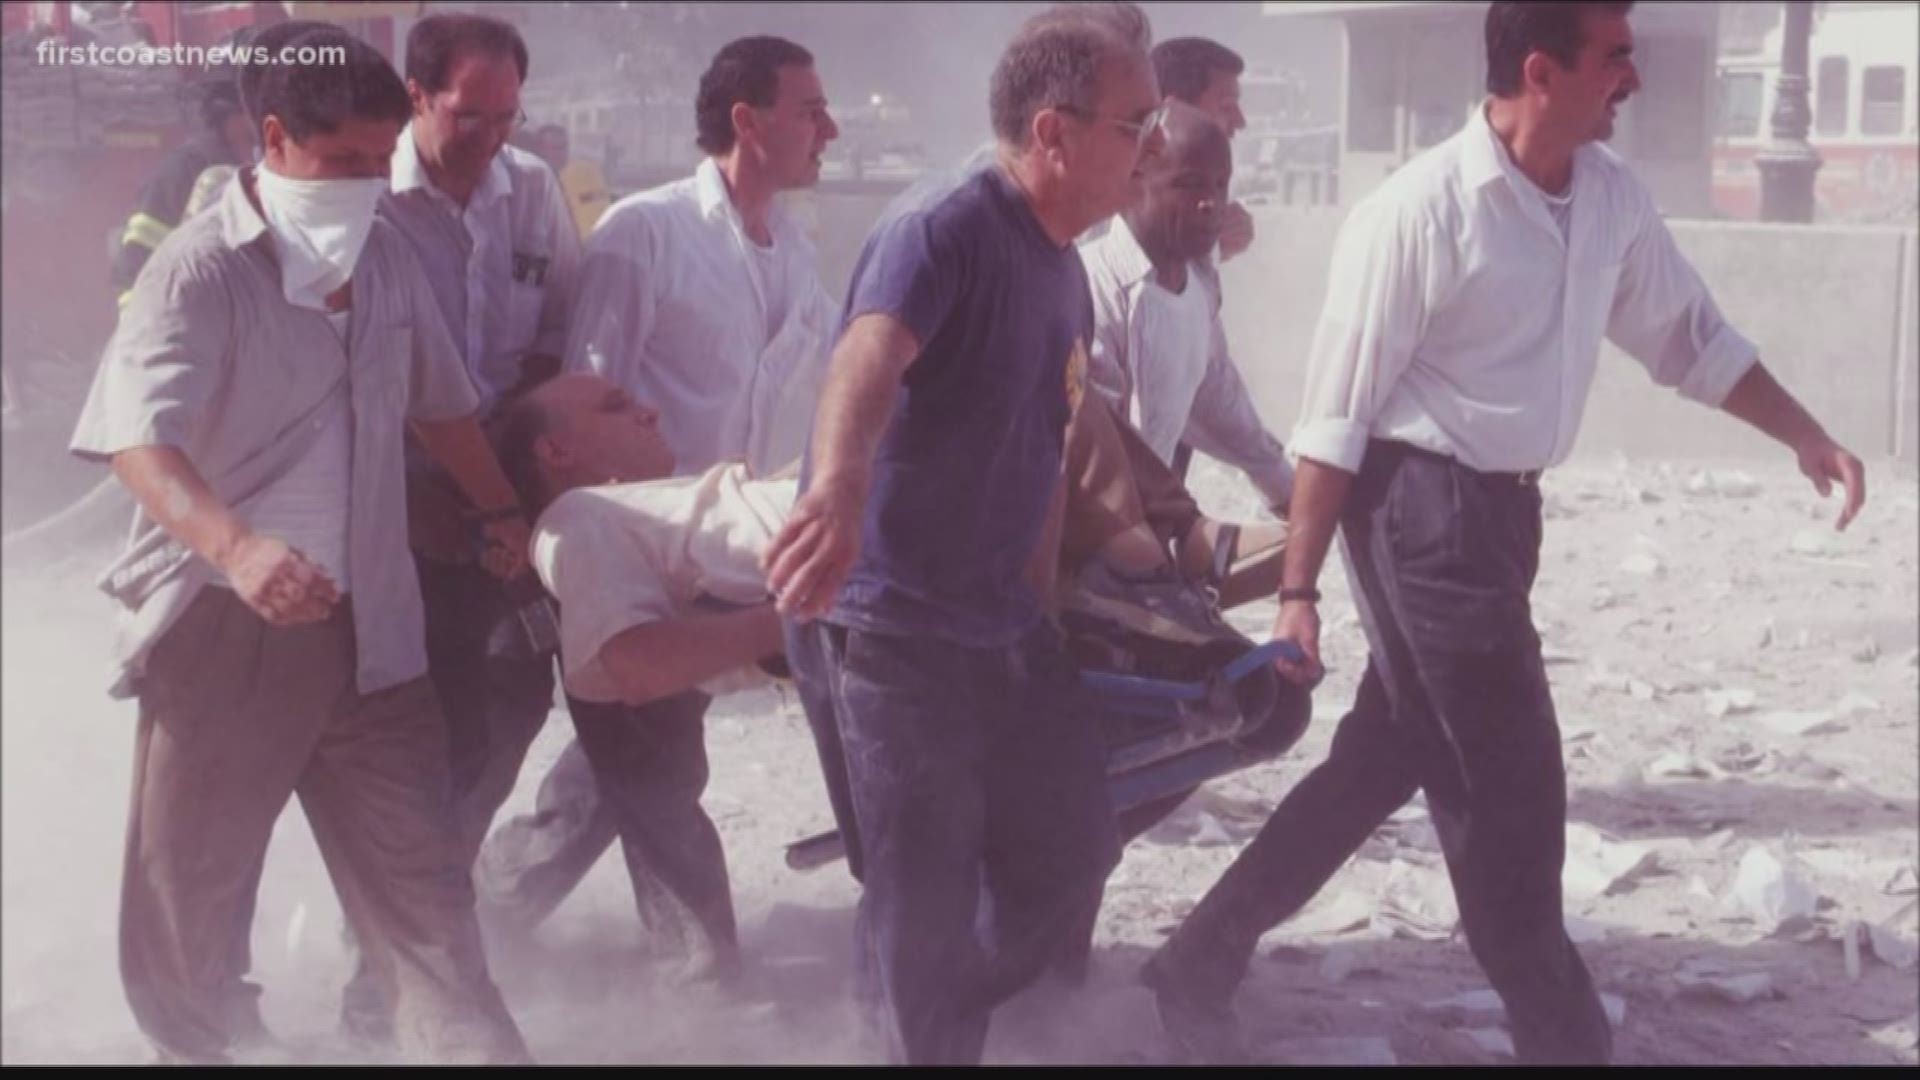 The anniversary of September 11th extends far beyond the actual date of the attacks. This time 18 years ago, in the days following the attacks, first responders were digging through the rubble to find survivors.